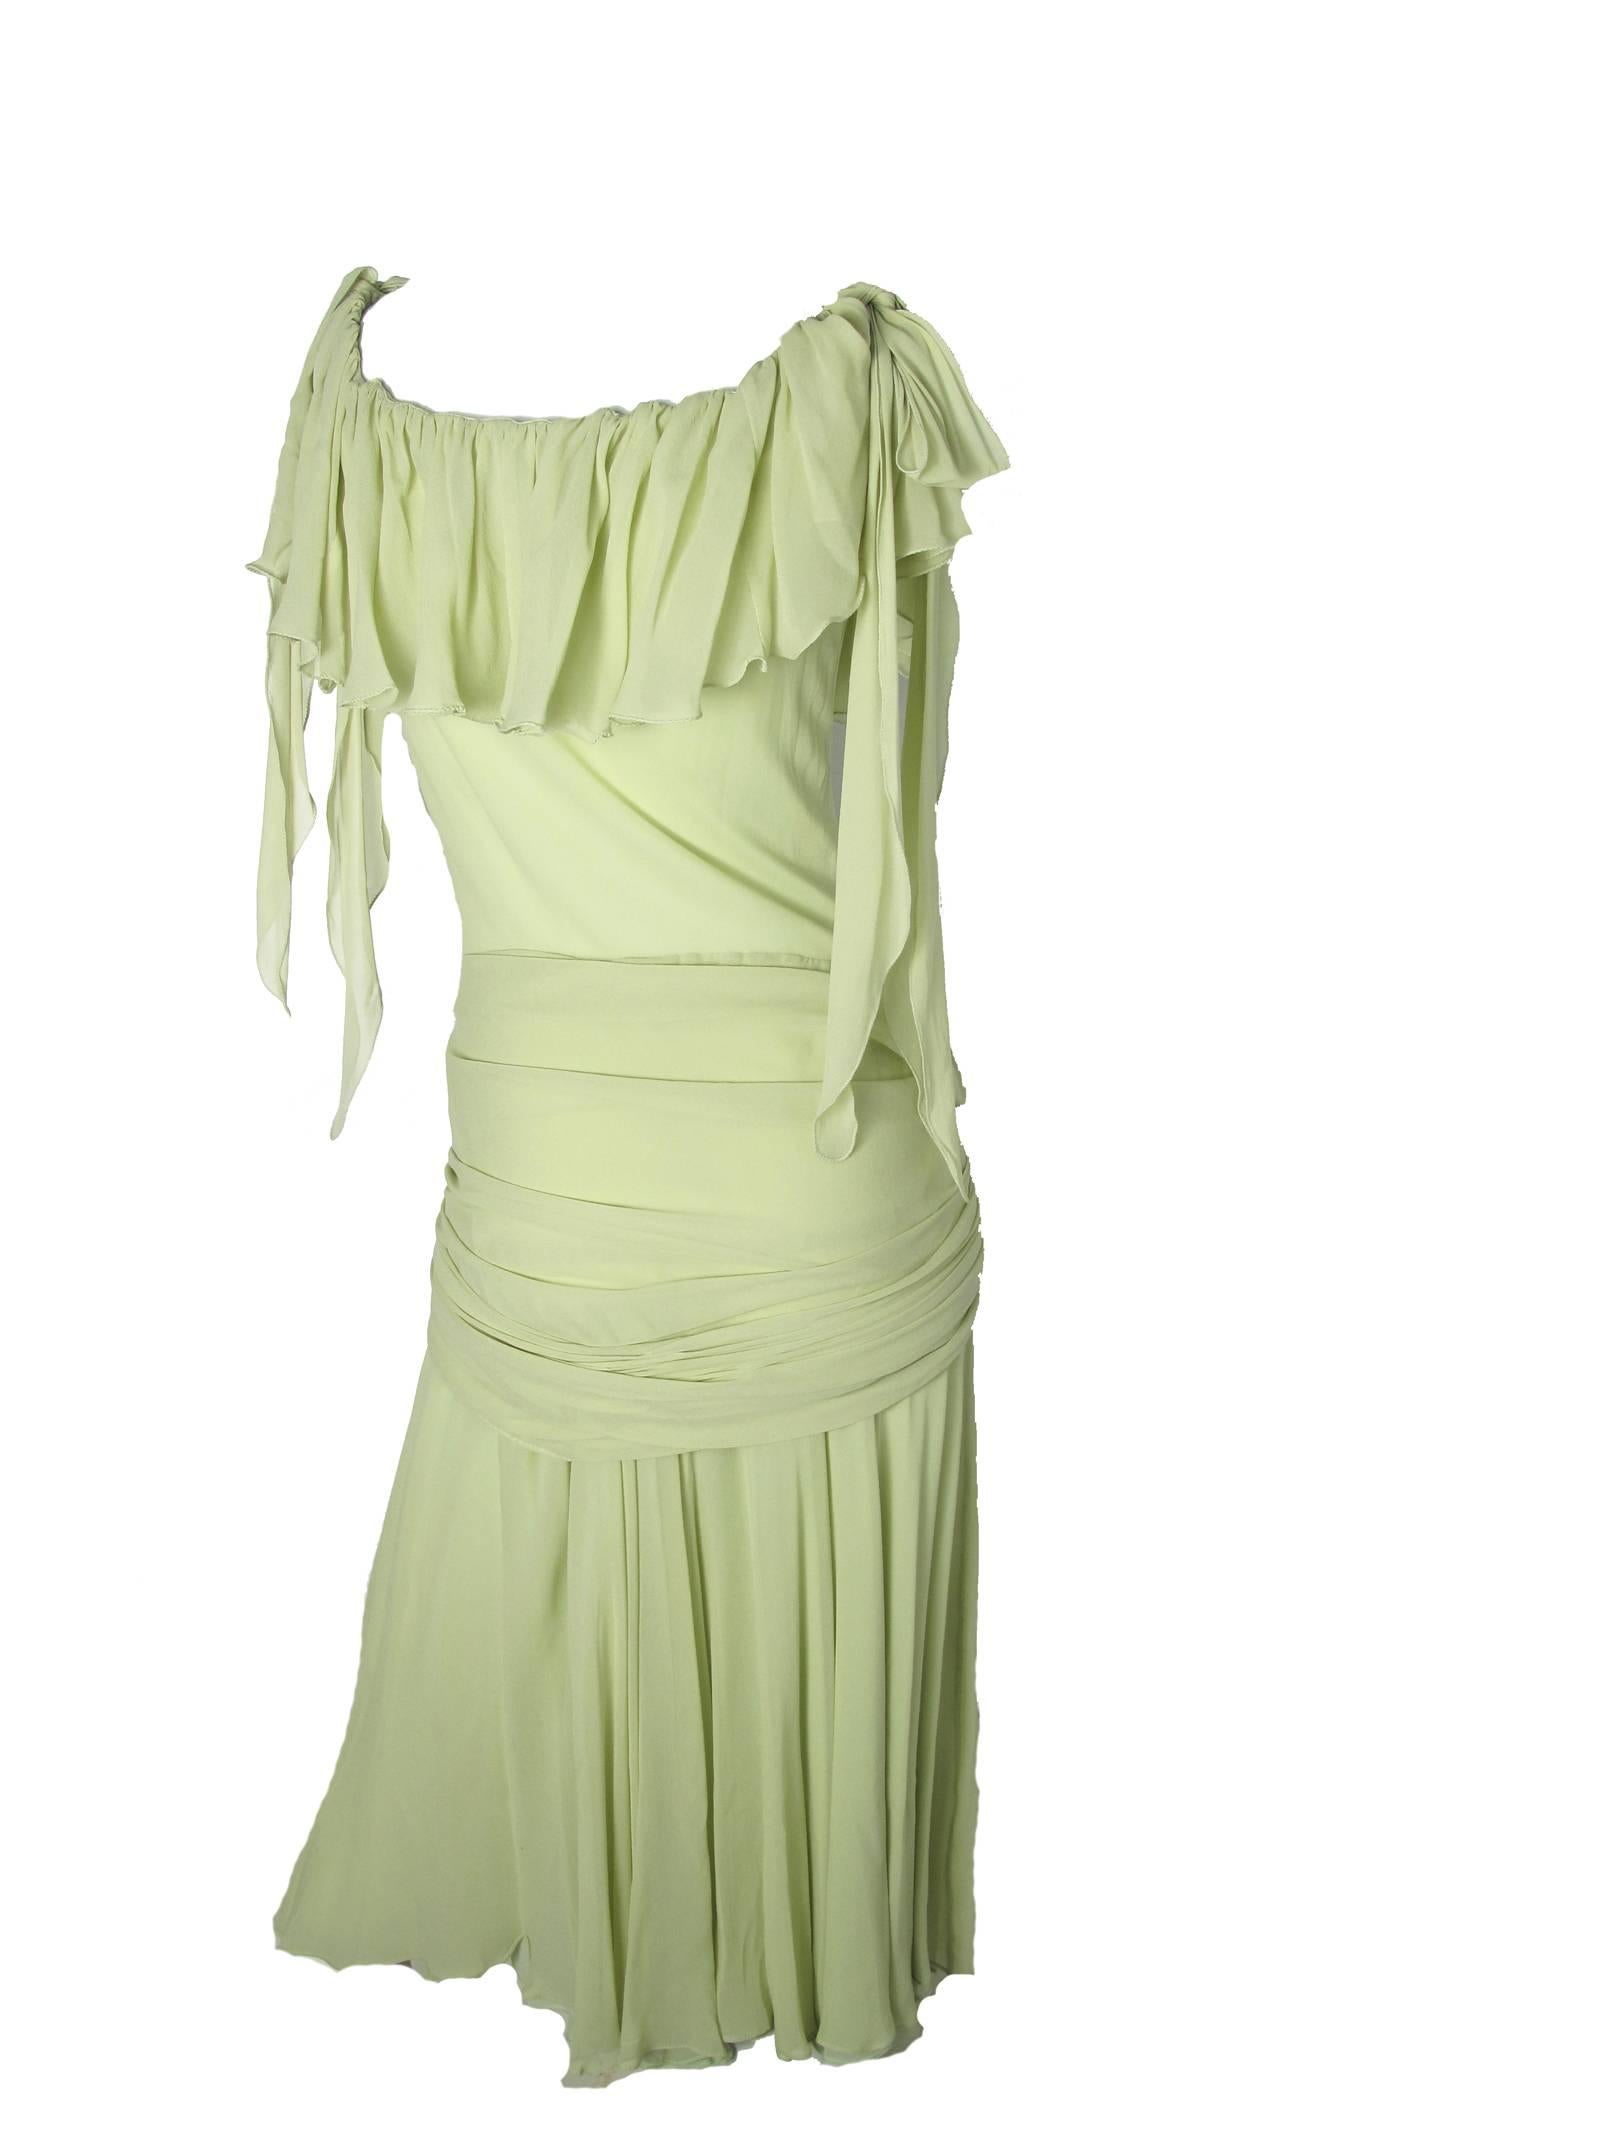 Moschino Couture light green silk chiffon dress with ties on shoulders and at waist. Condition: Very good, few light spots 
Size 8 

33